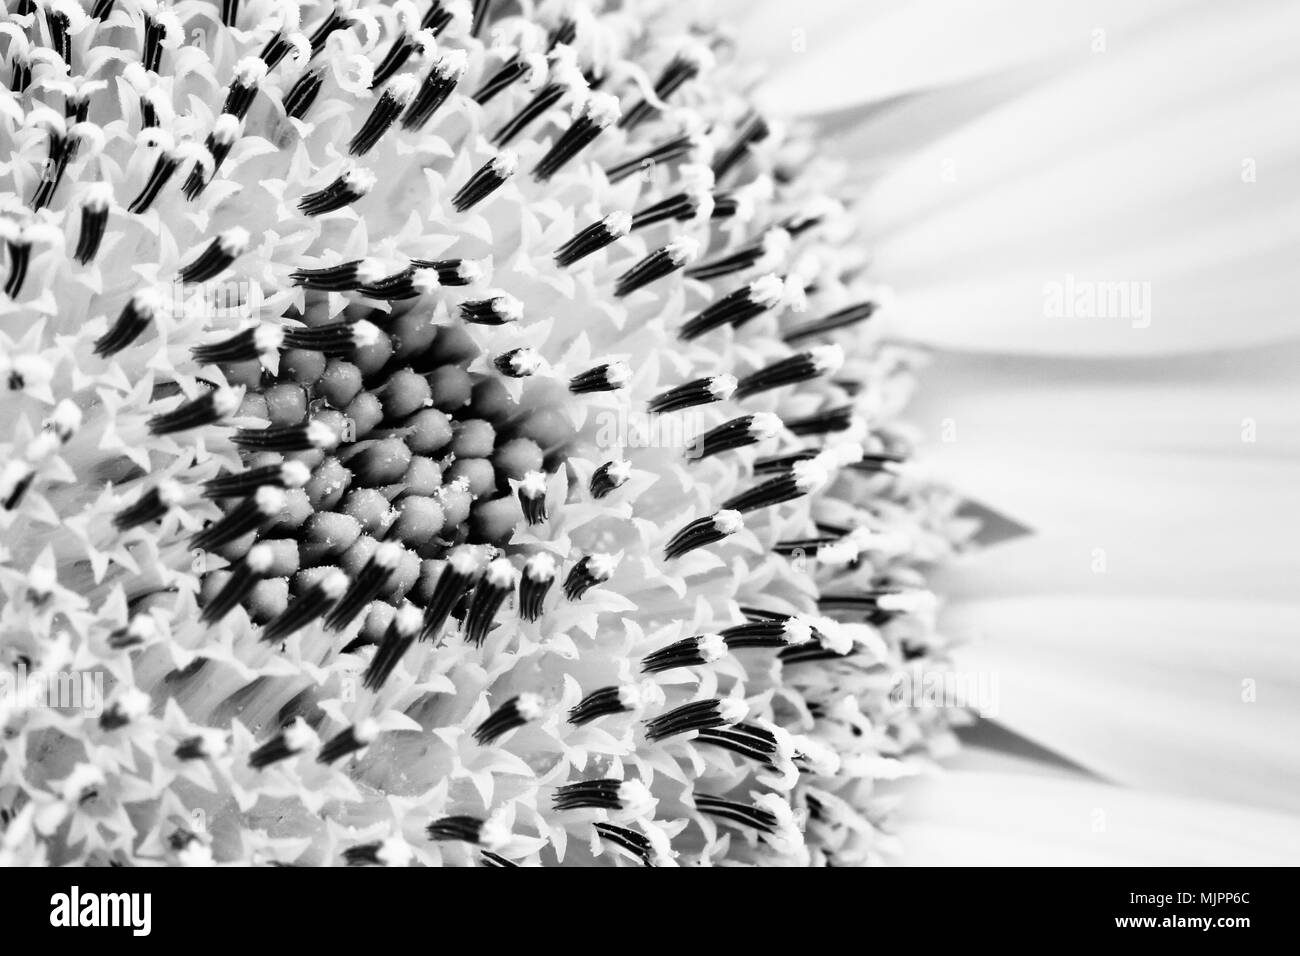 Sunflower close-up detailing the sunflower disk and the ray and tiny disk flowers (or florets) which compose the disk. Macro photo in black and white  Stock Photo